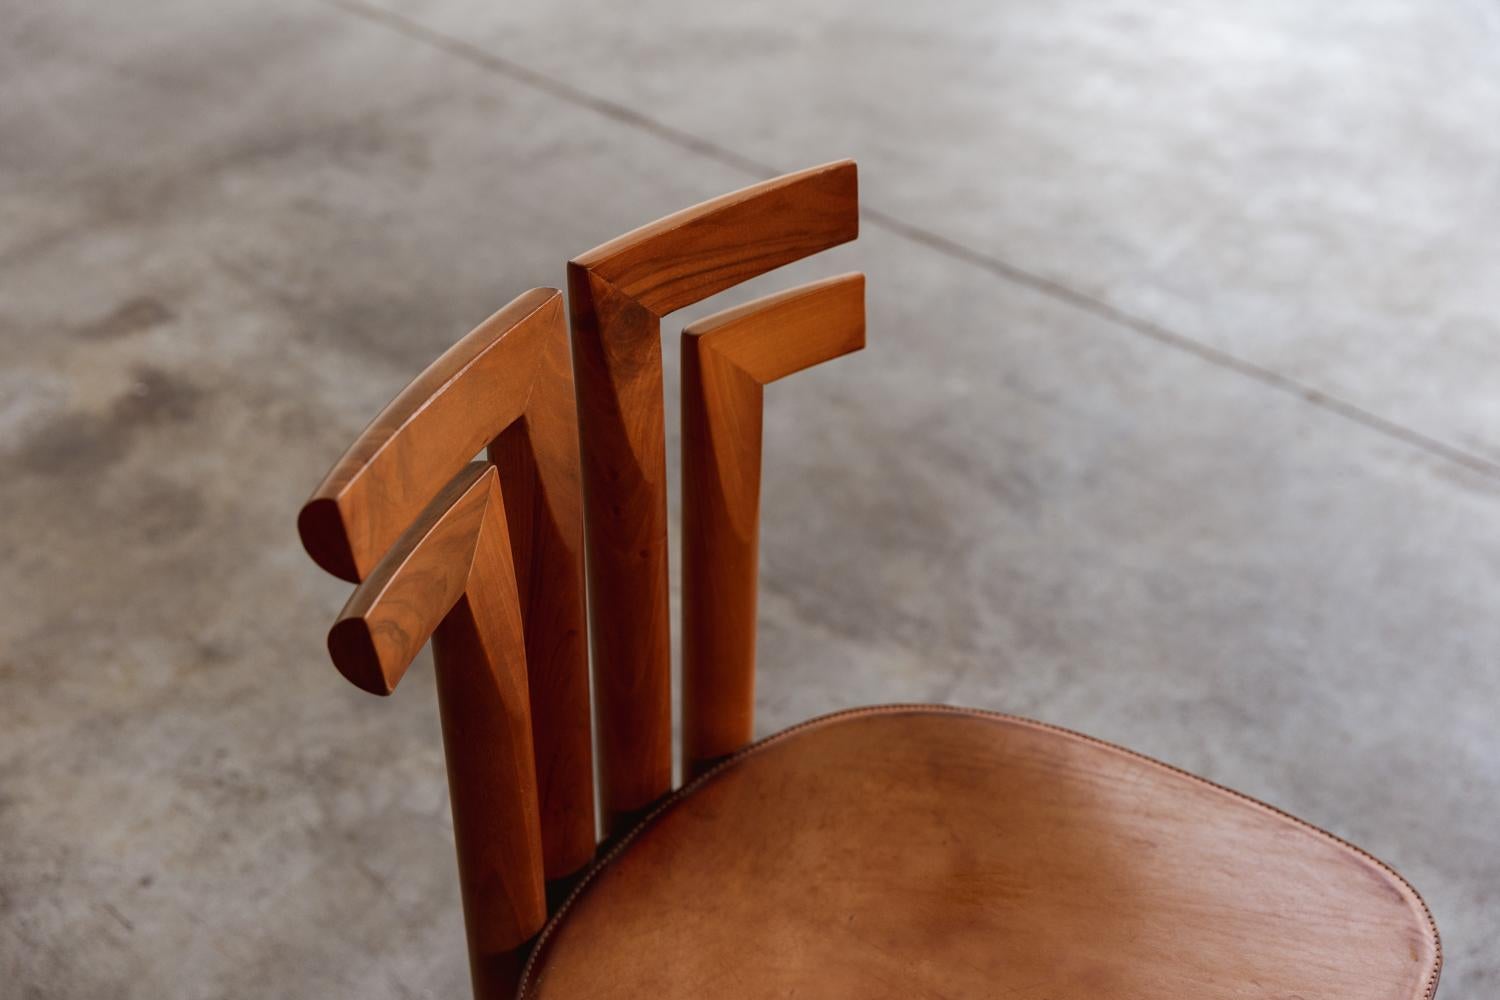 Leather Mario Marenco “Sapporo” Dining Chairs for Mobil Girgi, 1970 For Sale